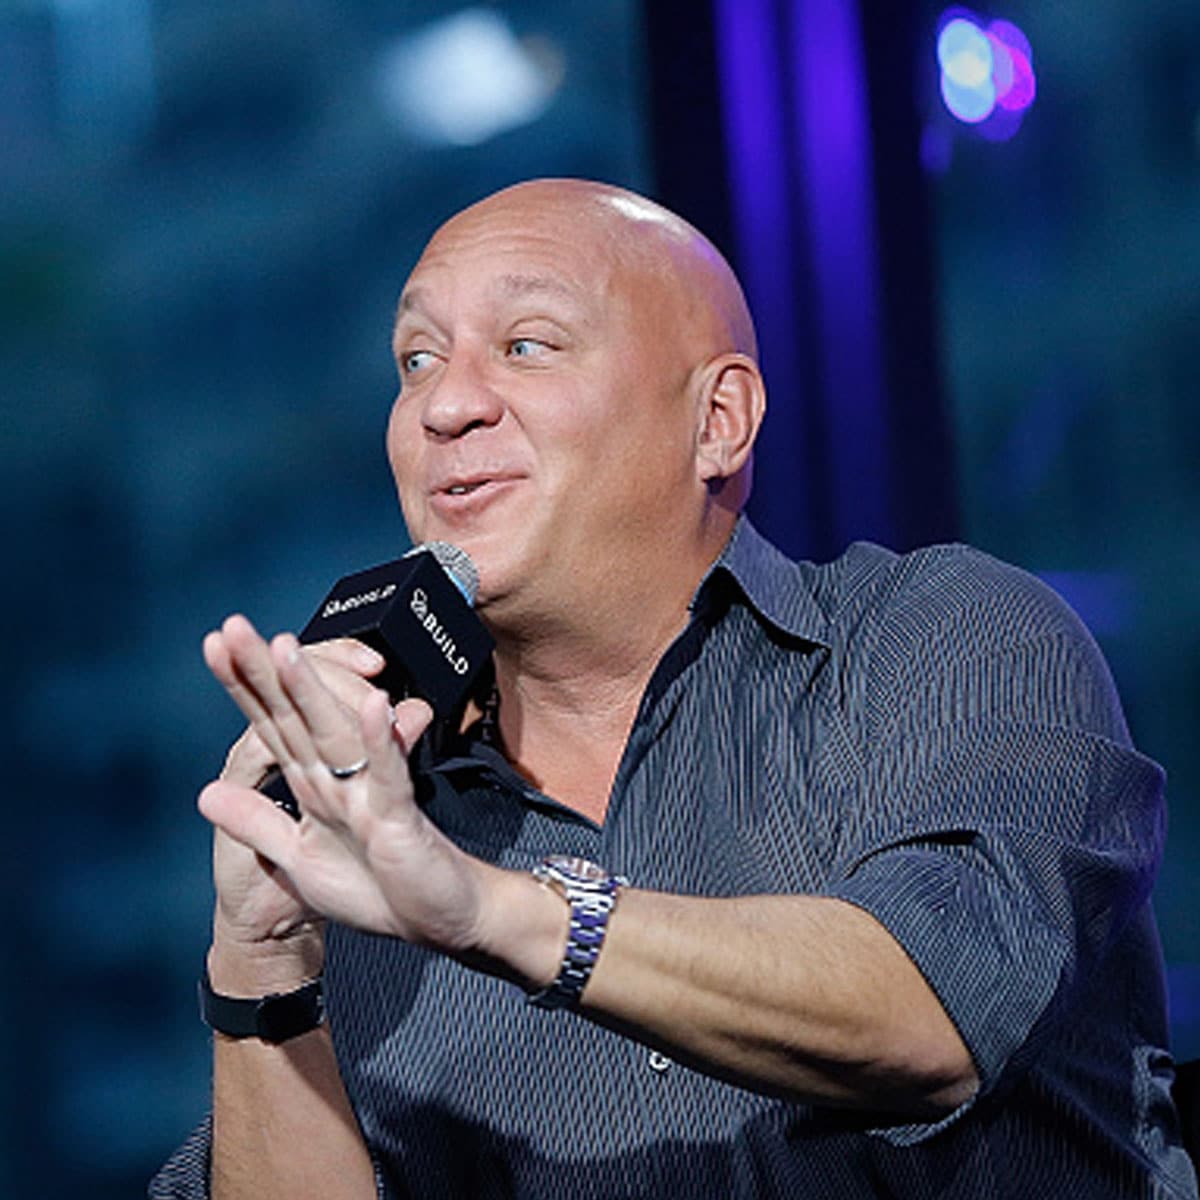 Steve Wilkos discusses the "The Steve Wilkos Show" during AOL Build